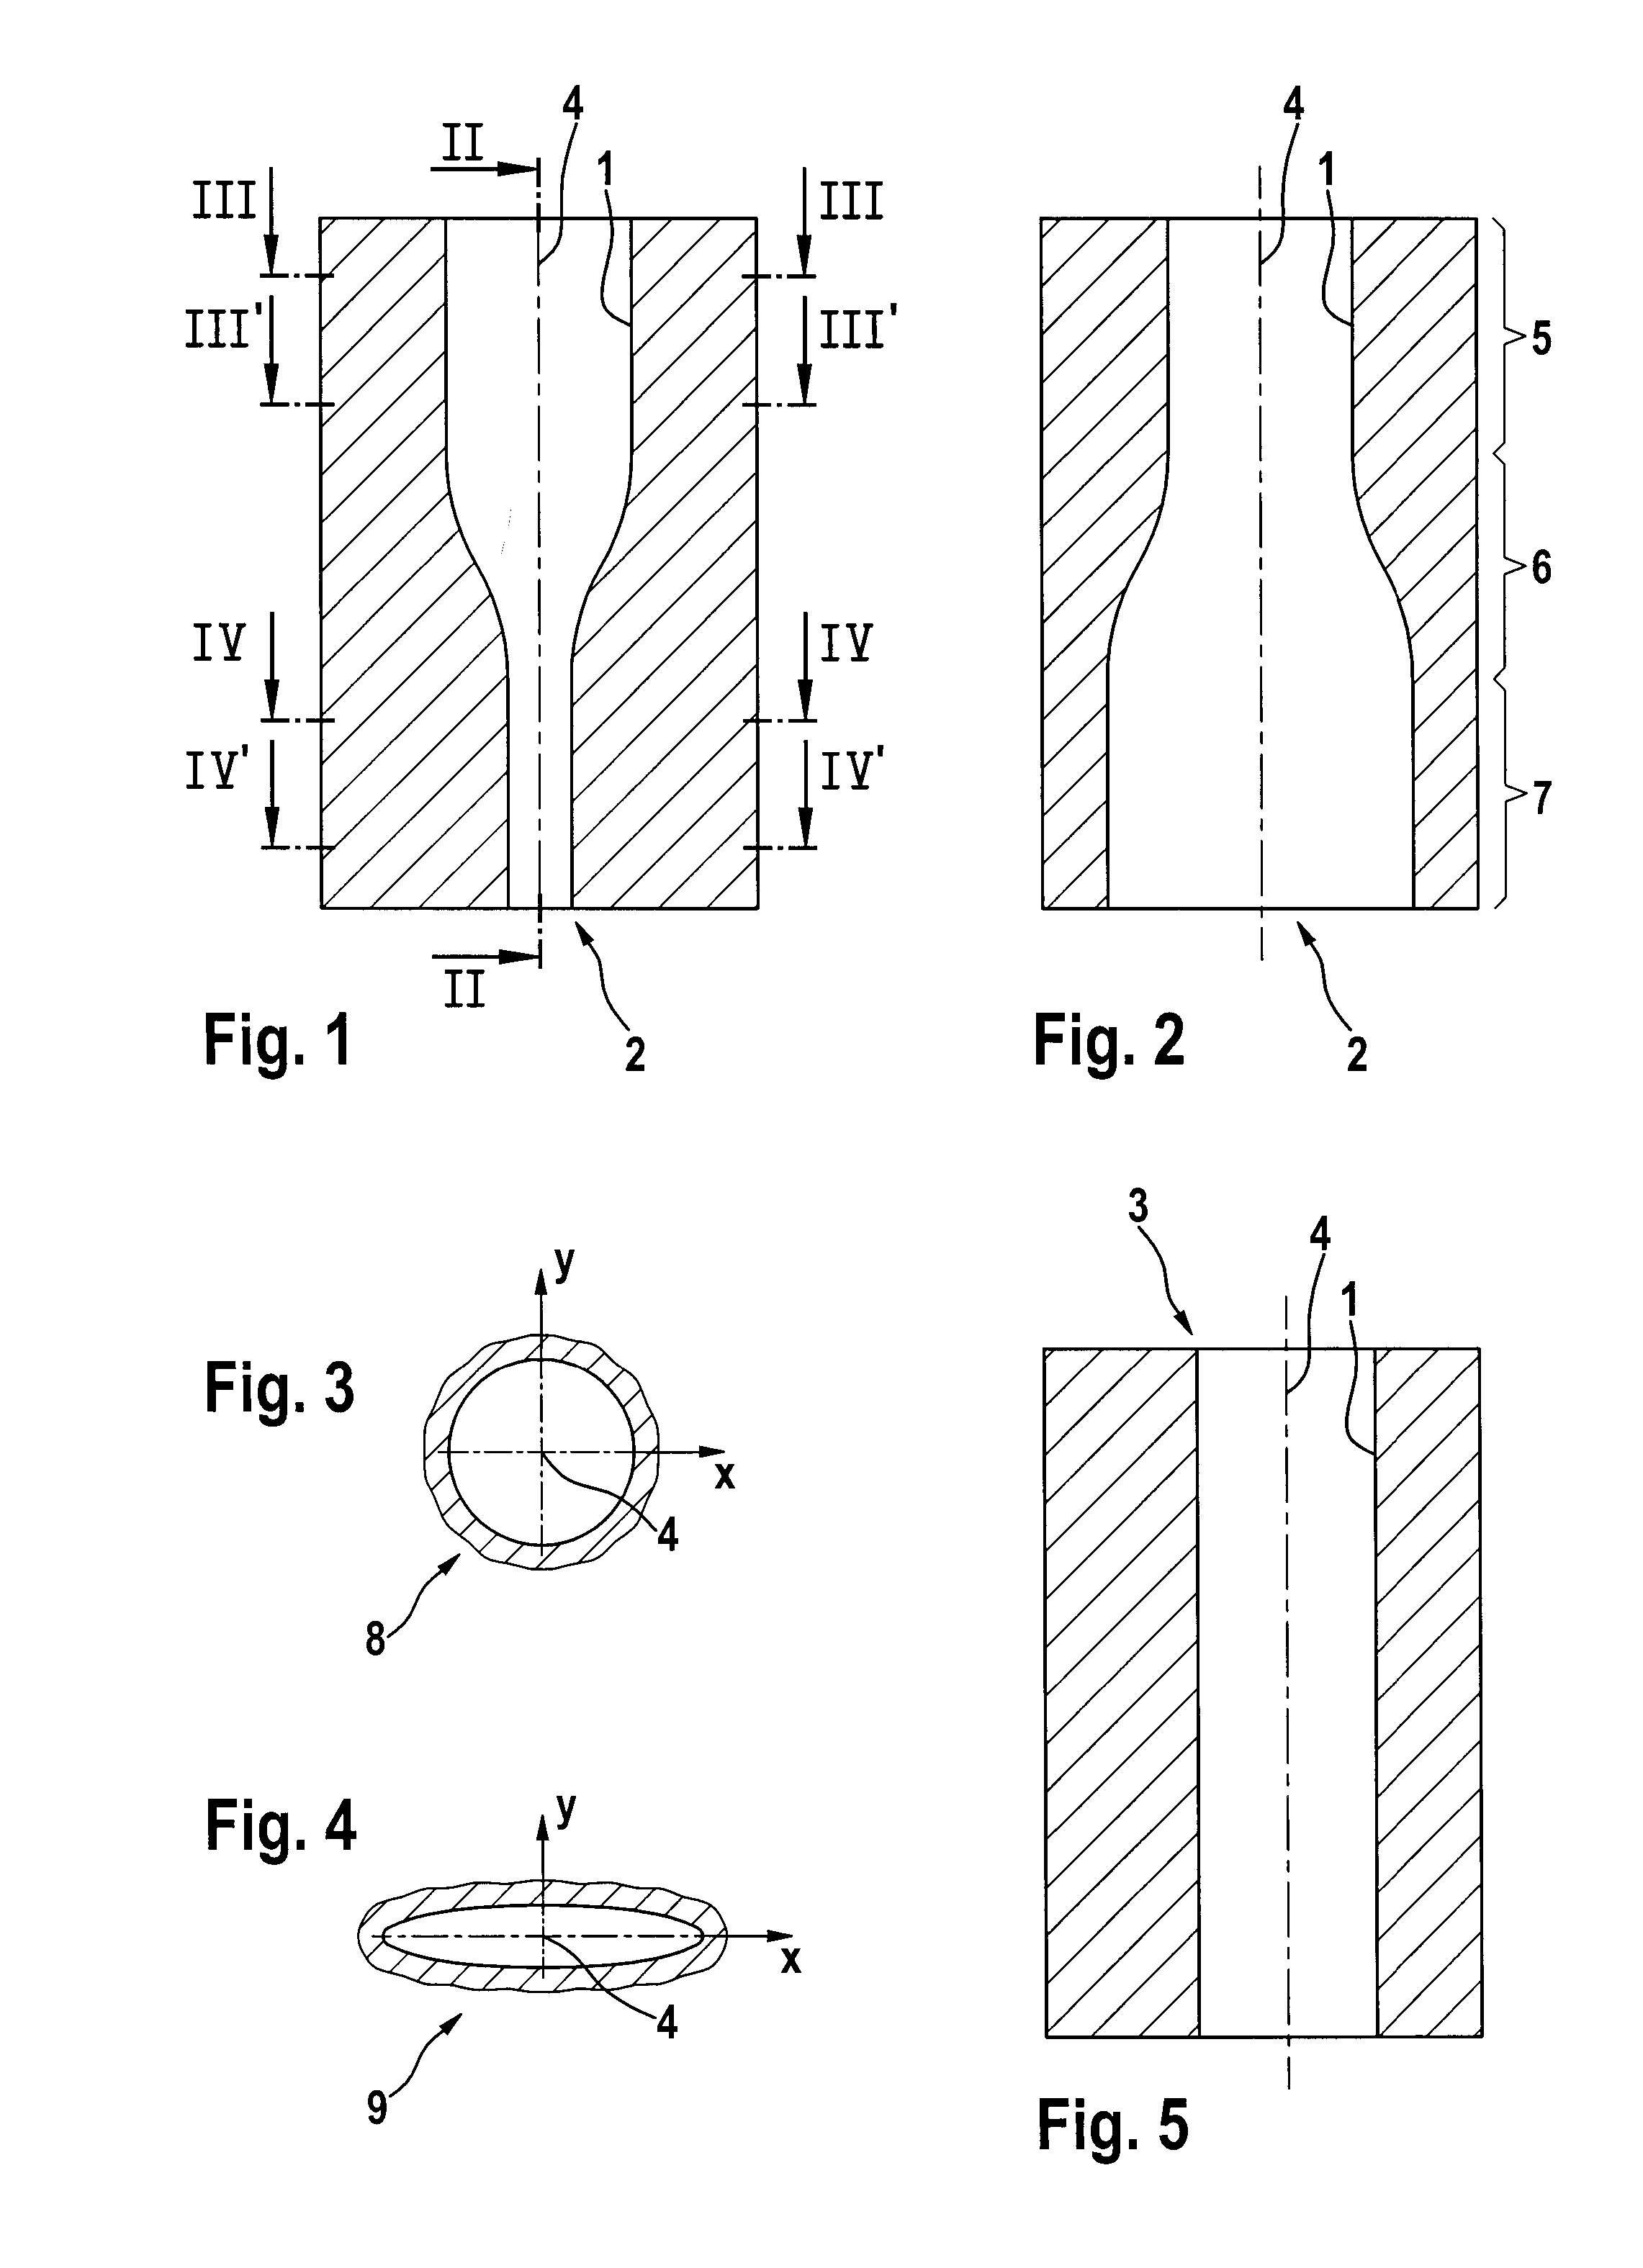 Method for Producing a Bore